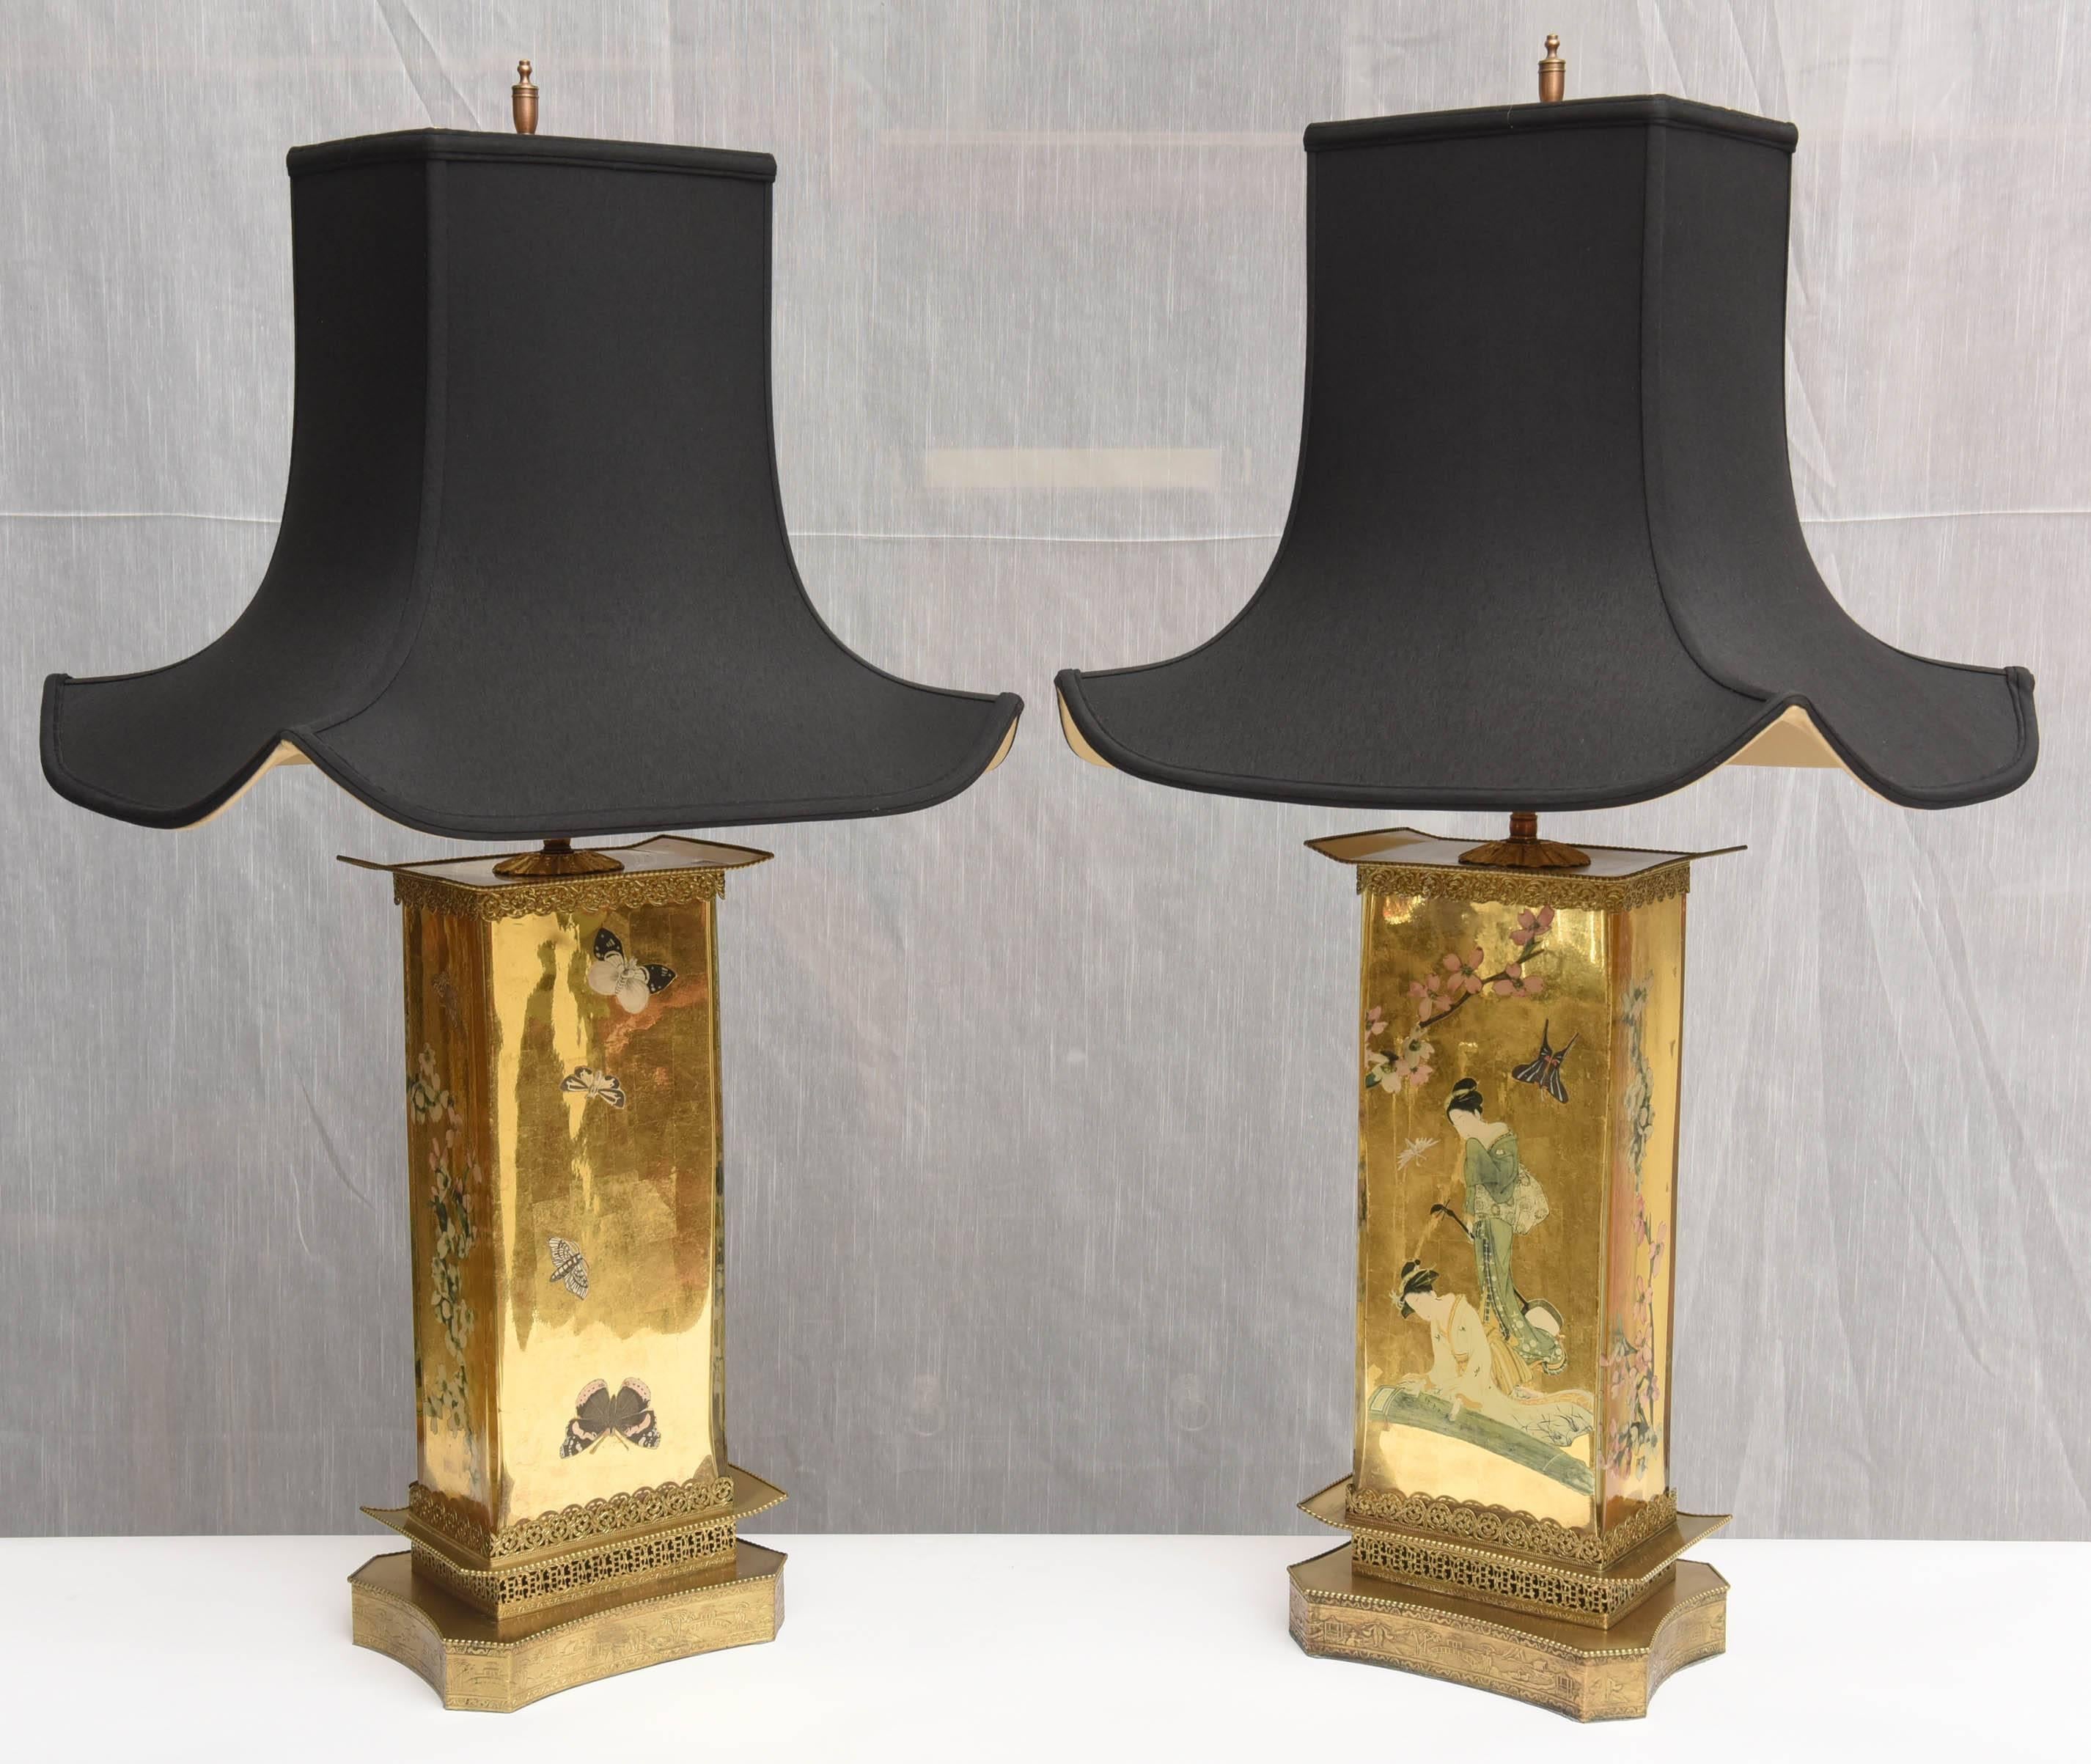 Unusual pair of glass lamps Anglo Japanese style Aesthetic Movement design. Art and Crafts. The body of each lamp is in a gold leave under glass with Japanese figures. Bronze base and bronze top, American, 1900. Electric system recently redone. New